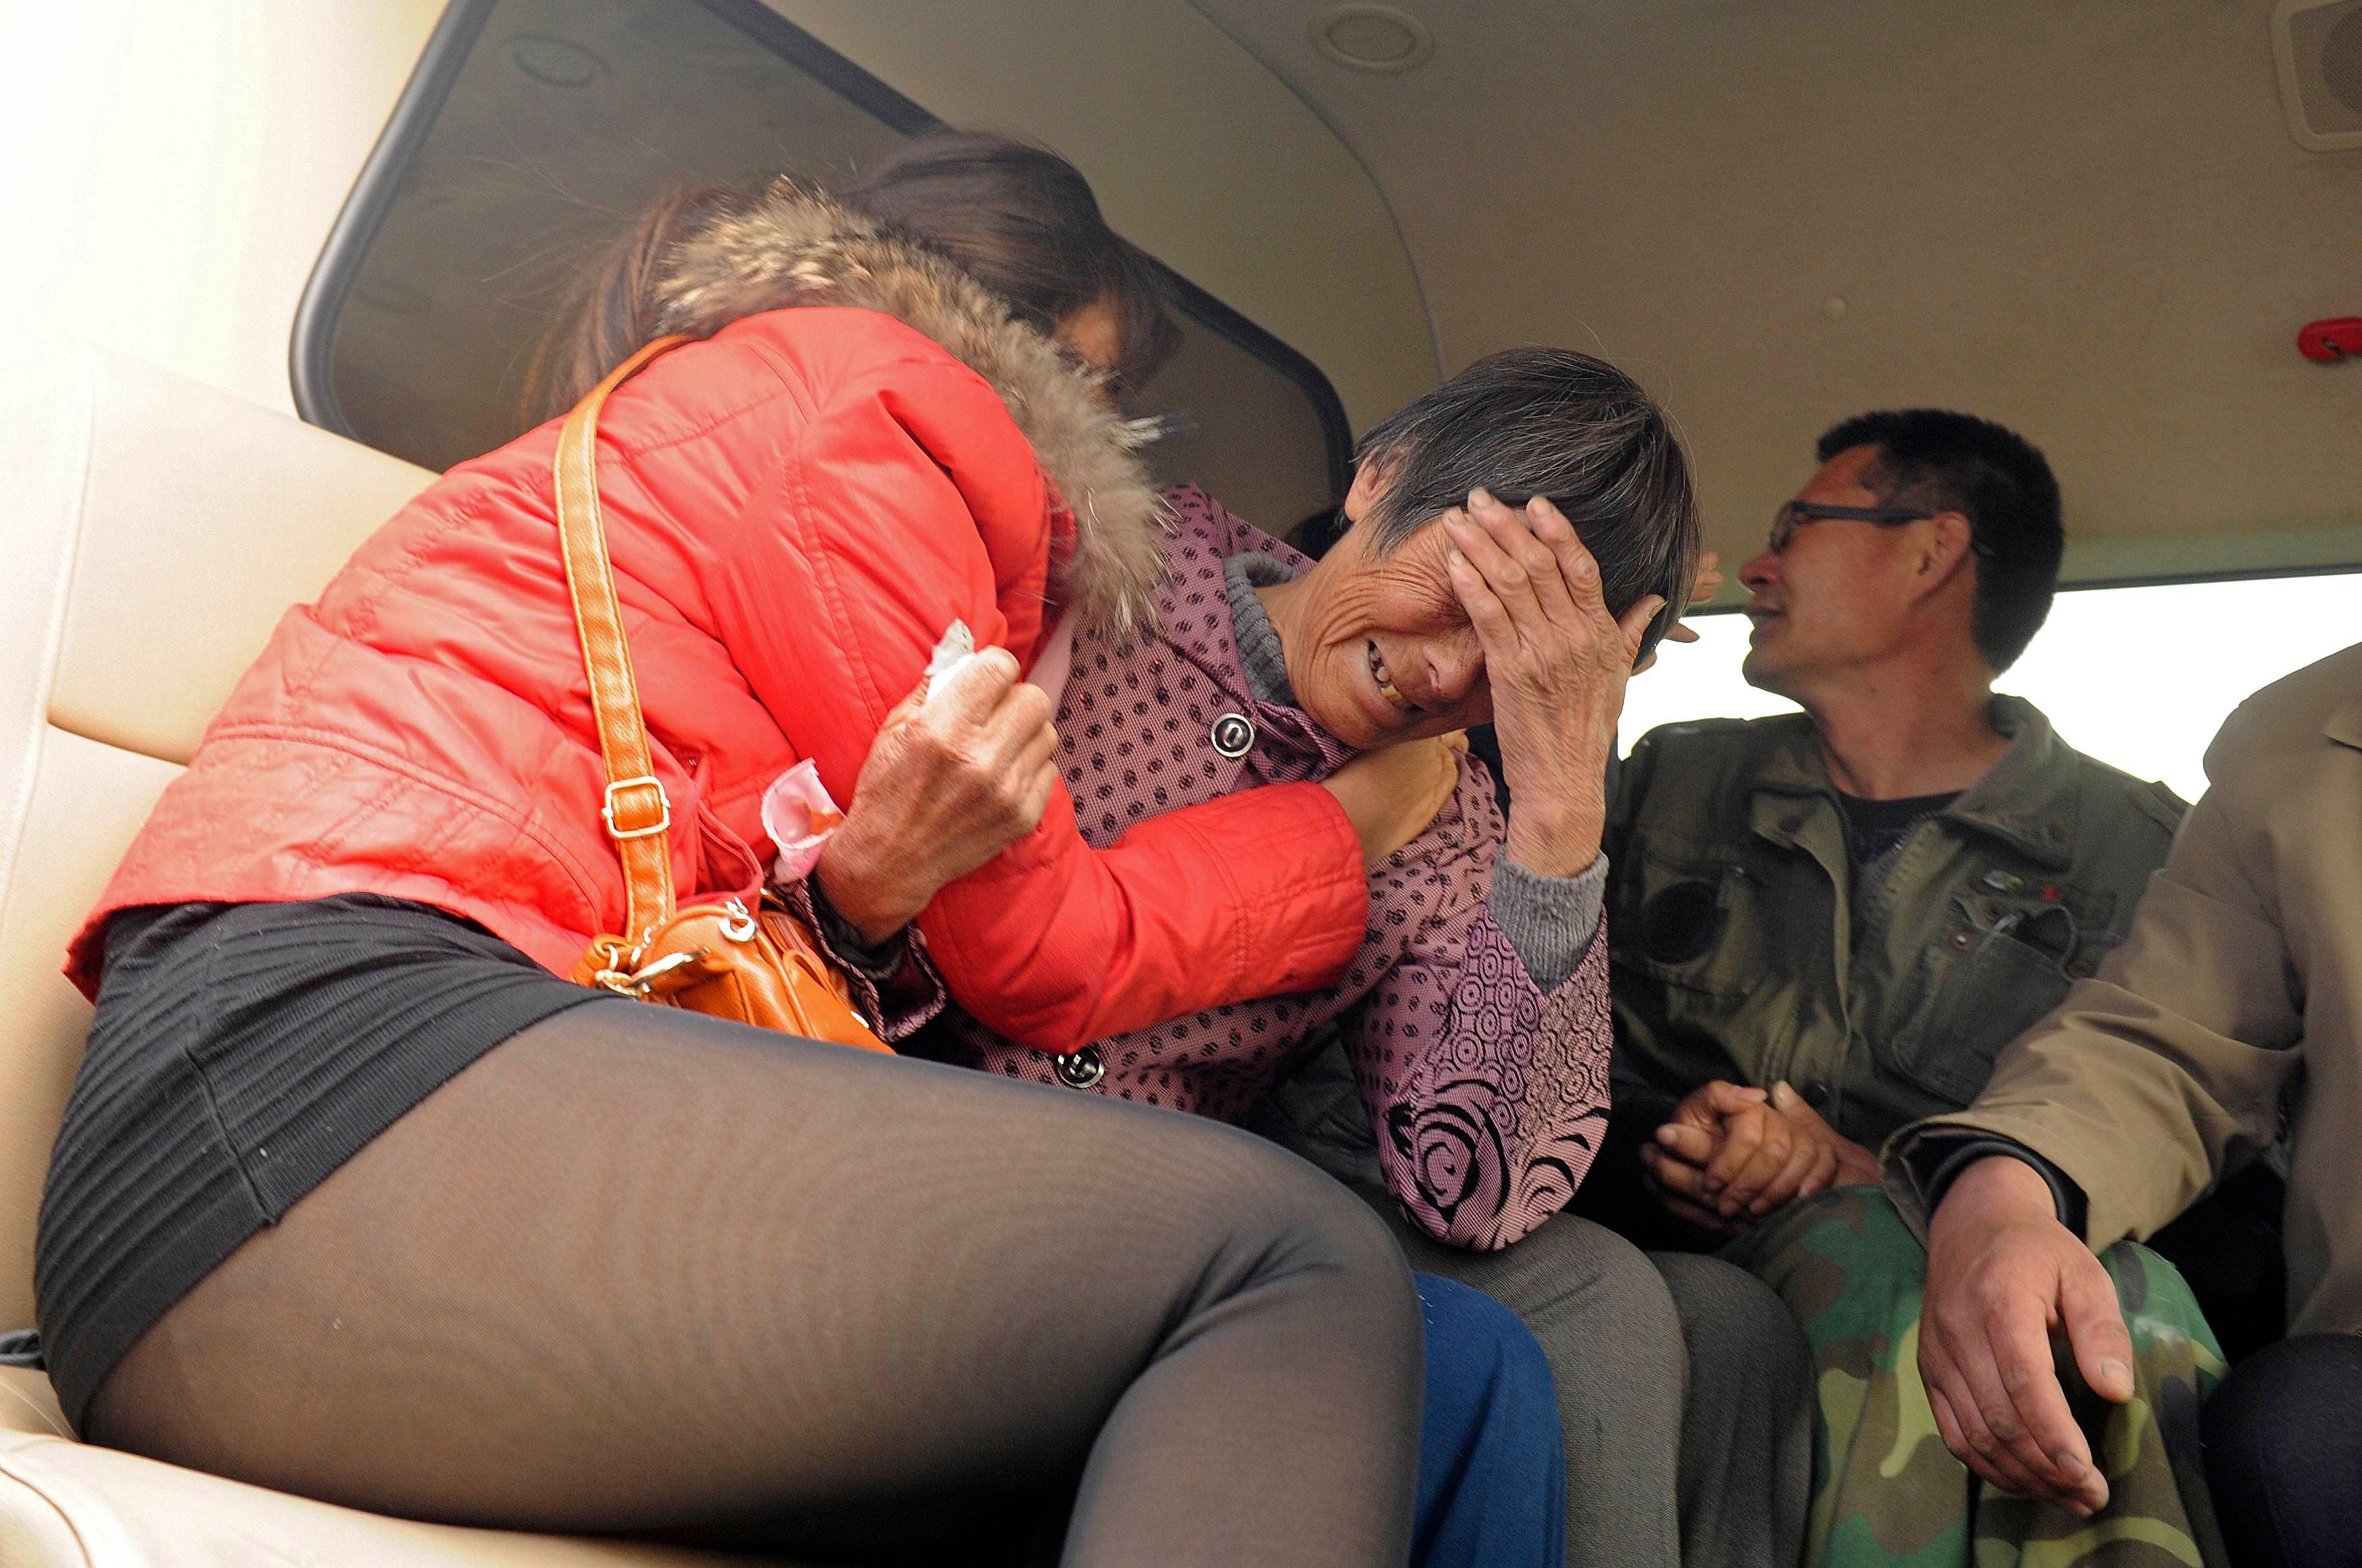  Relatives of kindergarten children, who died after the van they were travelling in ran into a truck, cry in Penglai, Shandong province, November 19, 2014. According to local media, at least 12 people were killed in the accident on Wednesday morning. Photo: Reuters